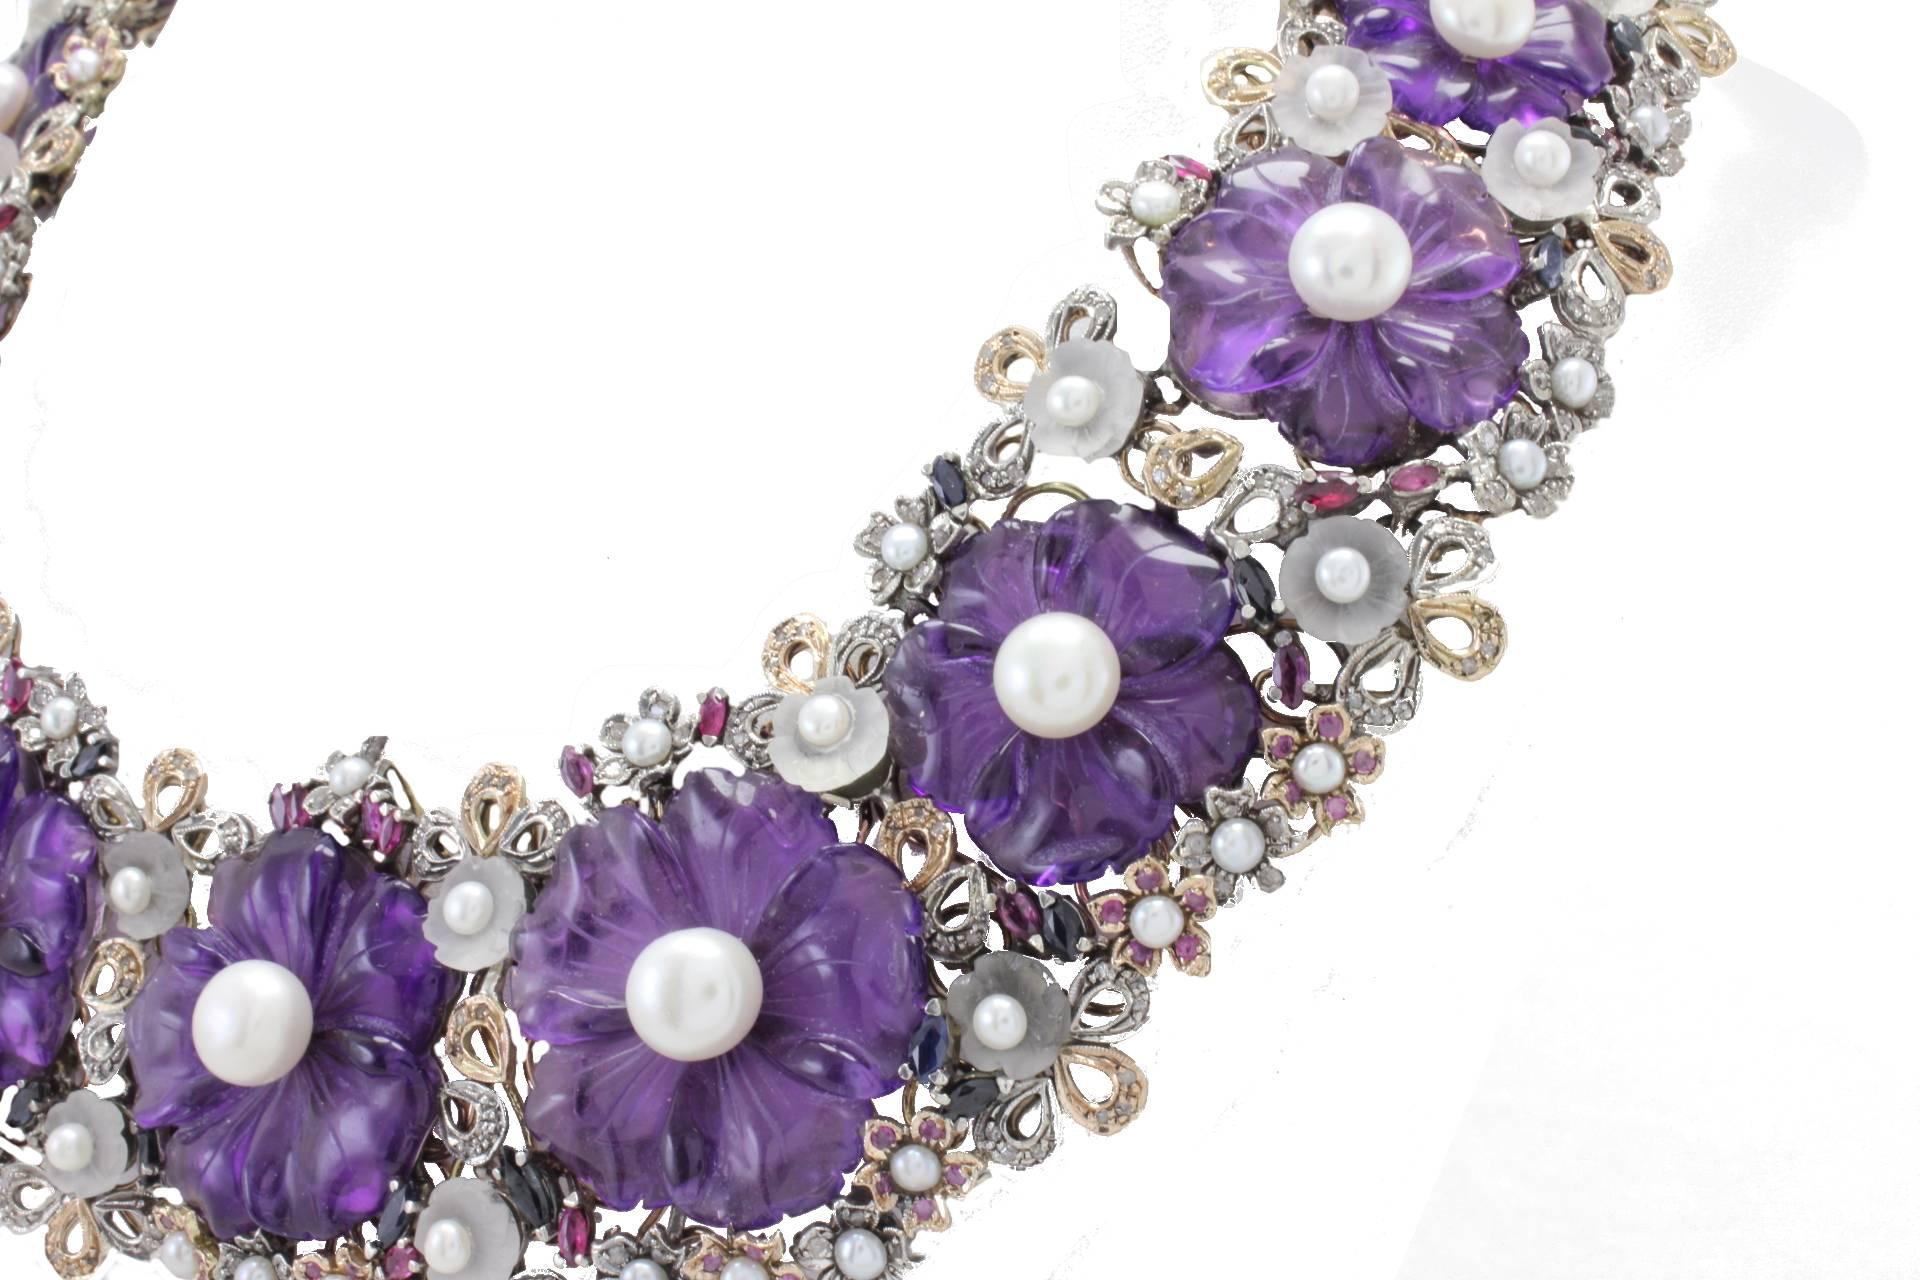 Charming and fashion design necklace, composed of flower shape amethyst and rock crystal (54.1Kt) with a diameter between 3-7mm(13.20, diamonds(5.66Kt) and emeralds, rubies, and blue saphires(14.55Kt). All mounted on 9Kt gold and silver. Tot weight